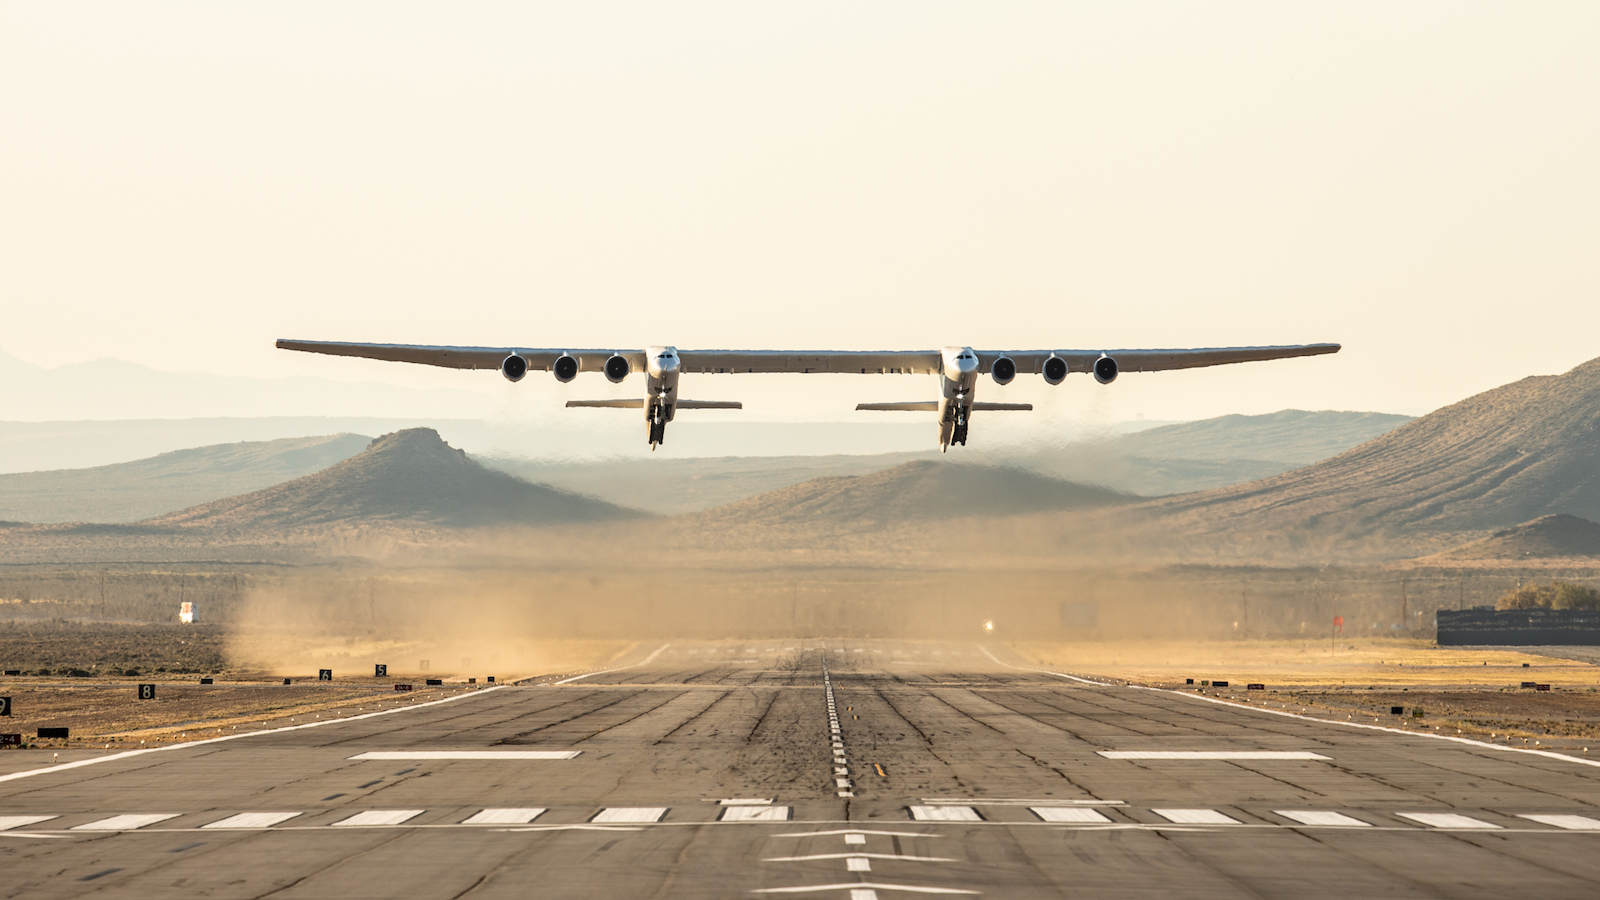 A PICTURE OF THE STRATOLAUNCH AIRCRAFT TAKING FLIGHT